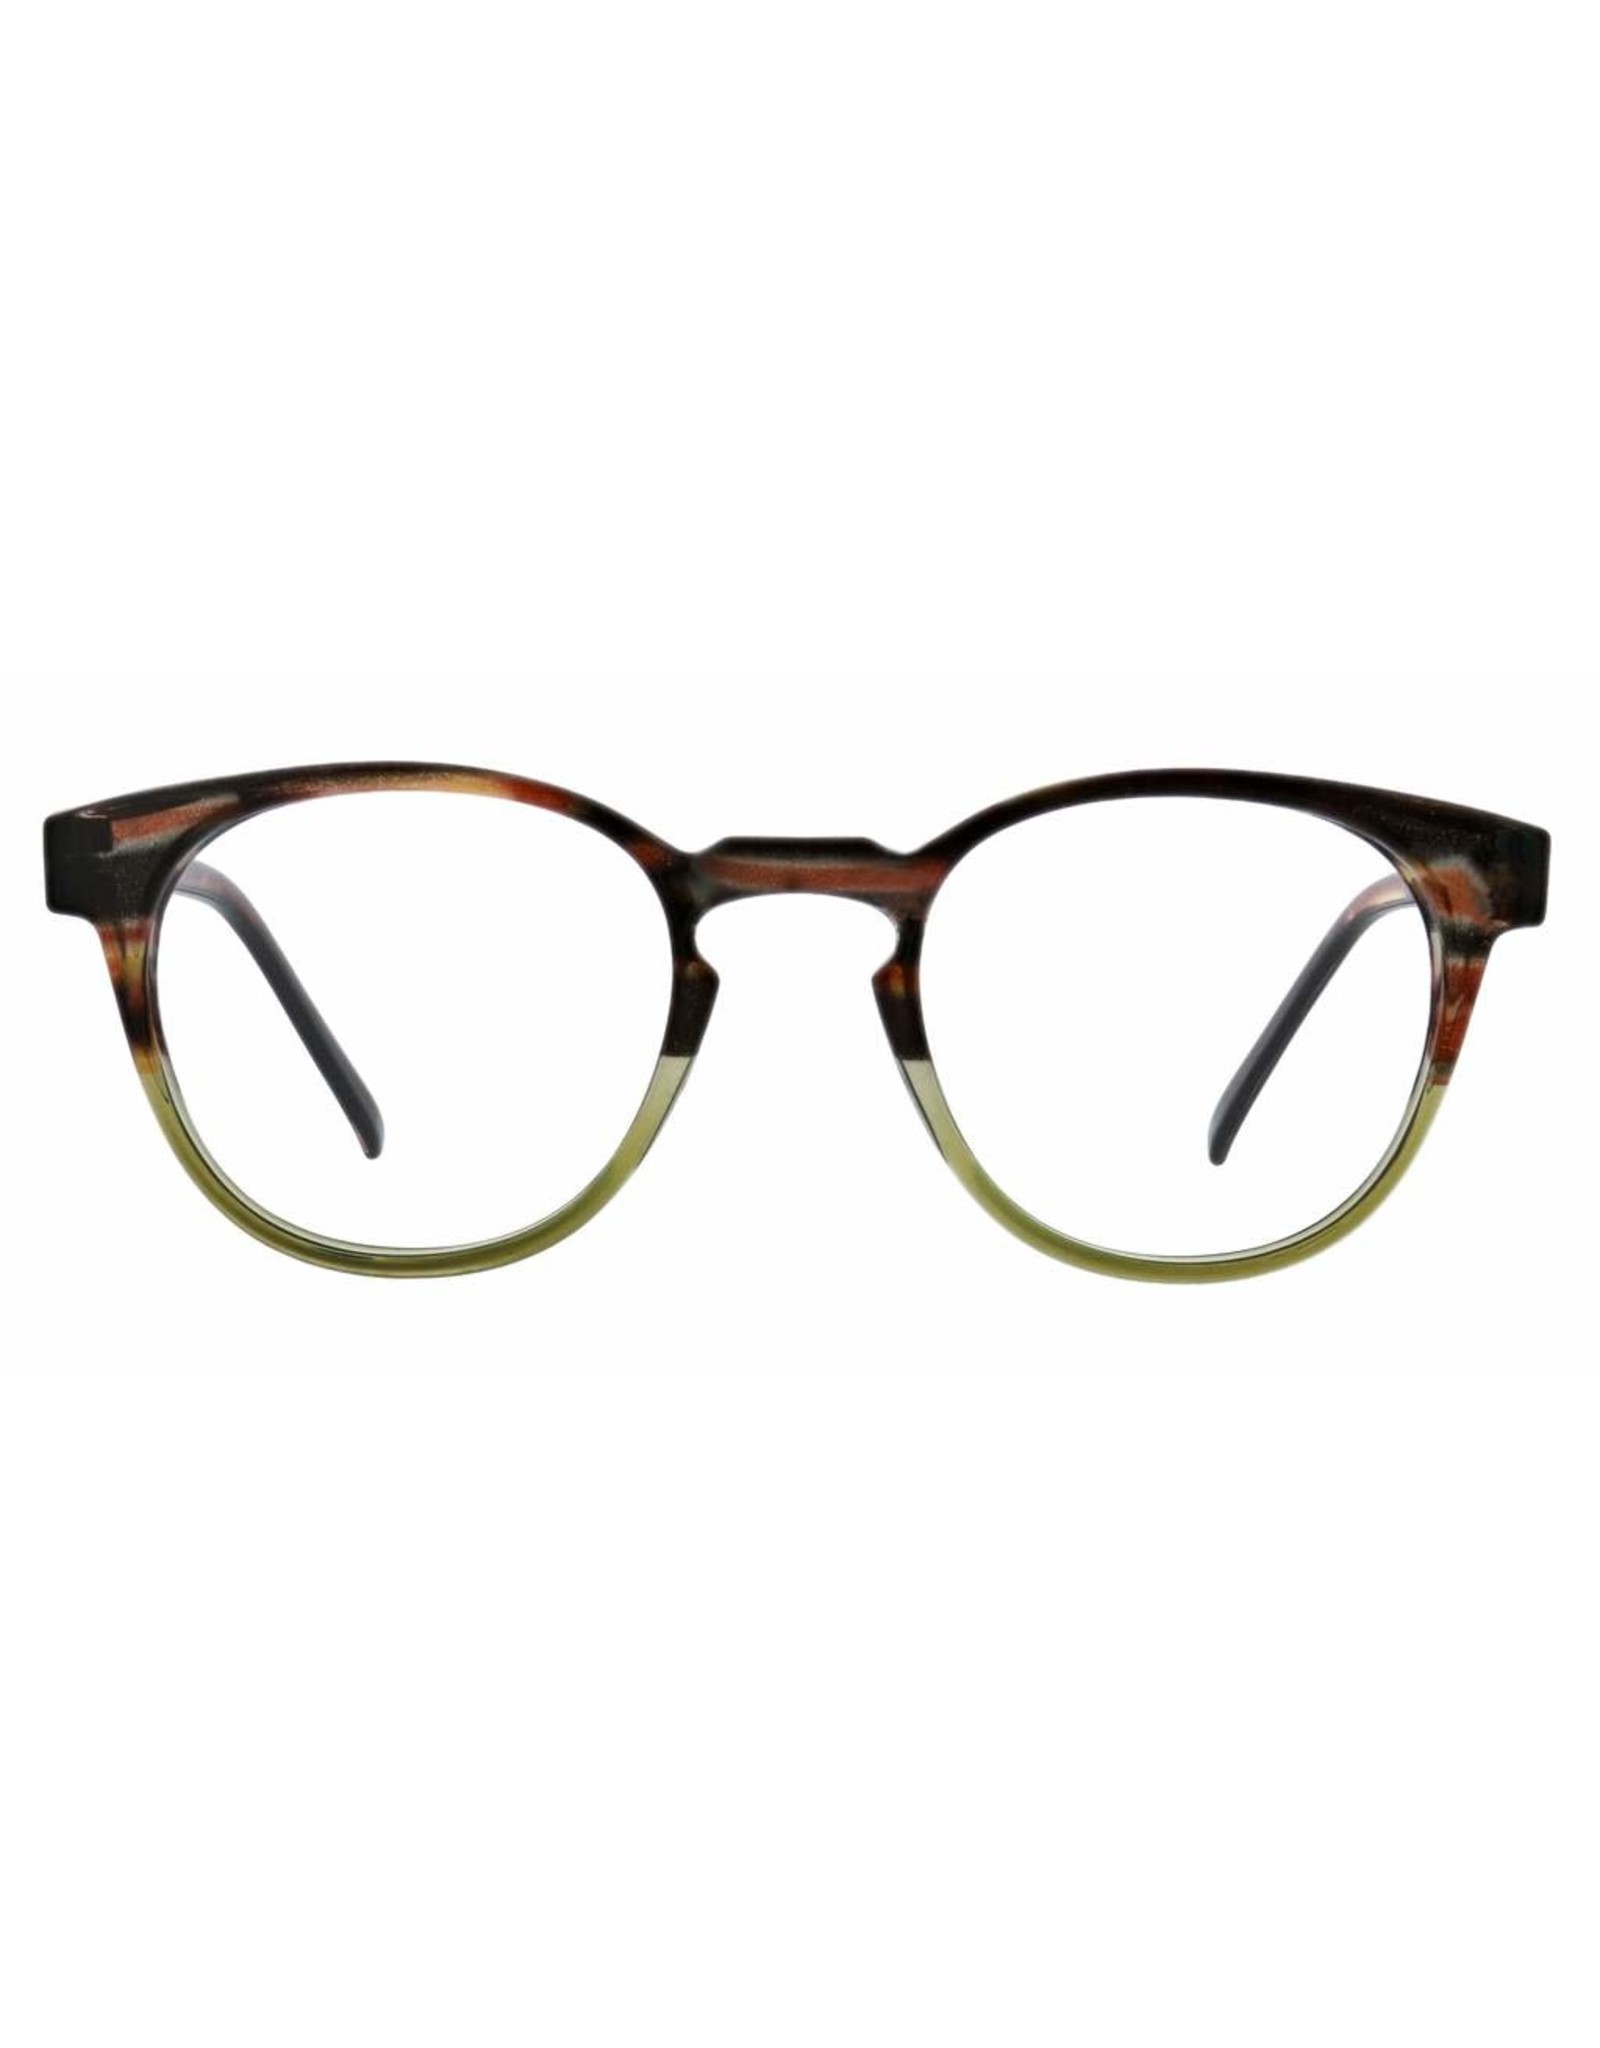 Reading Glasses Dynomite Brown-Green +1.25